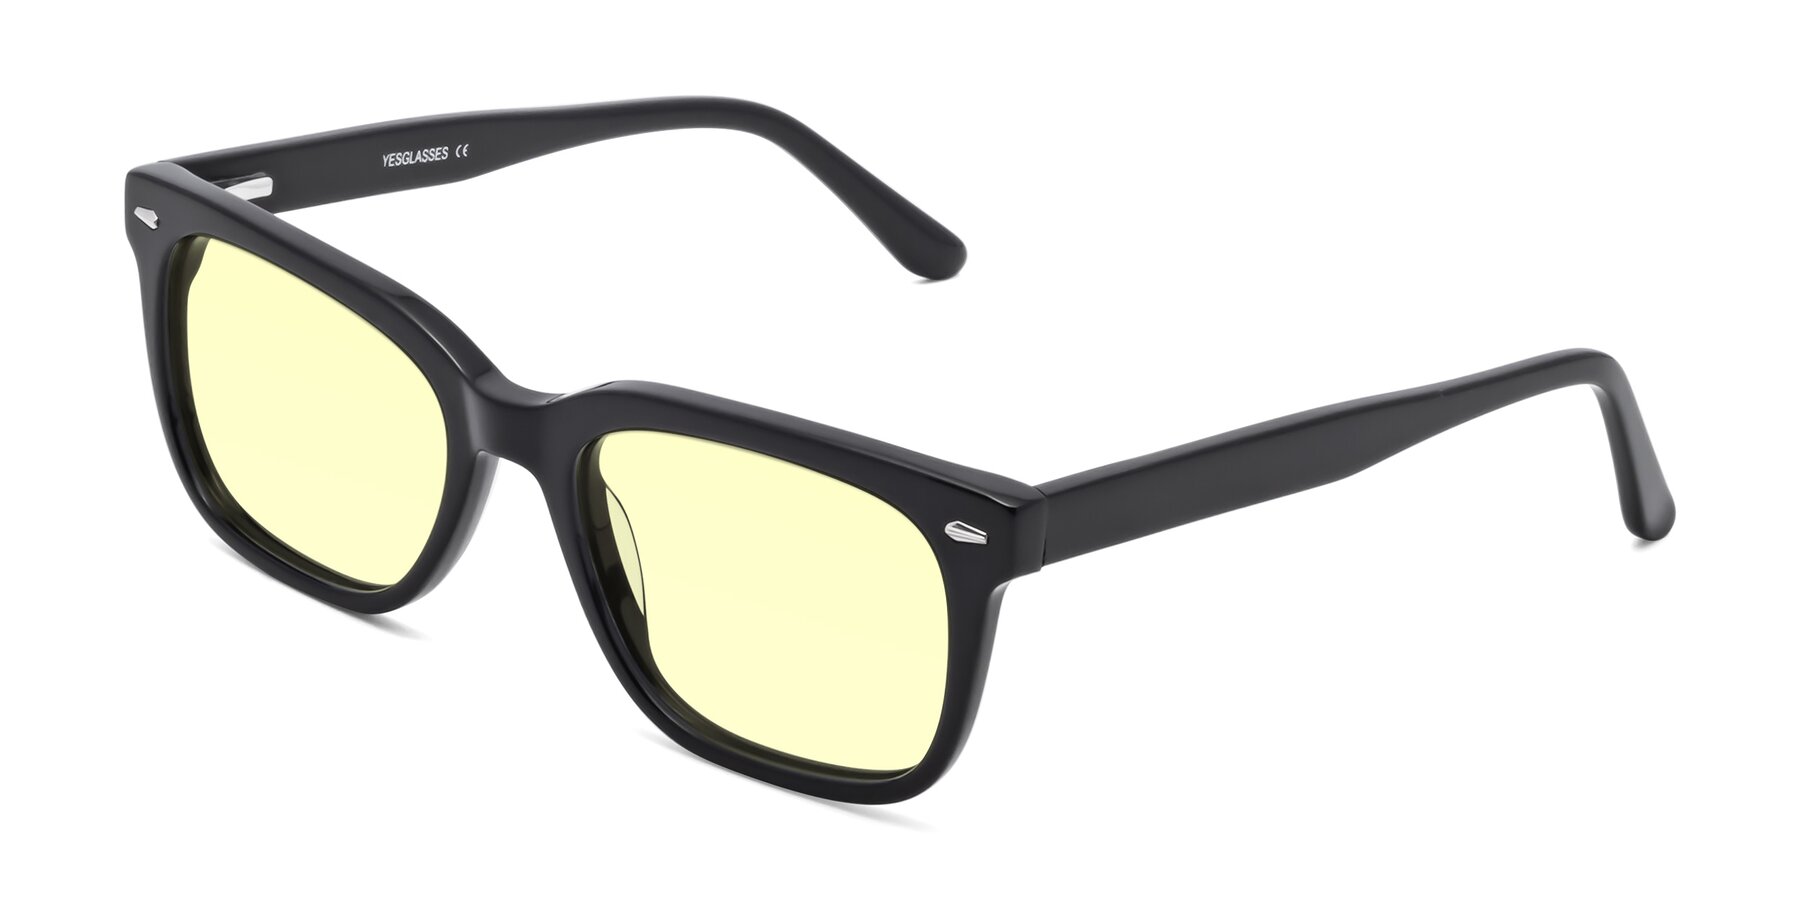 Angle of 1052 in Black with Light Yellow Tinted Lenses